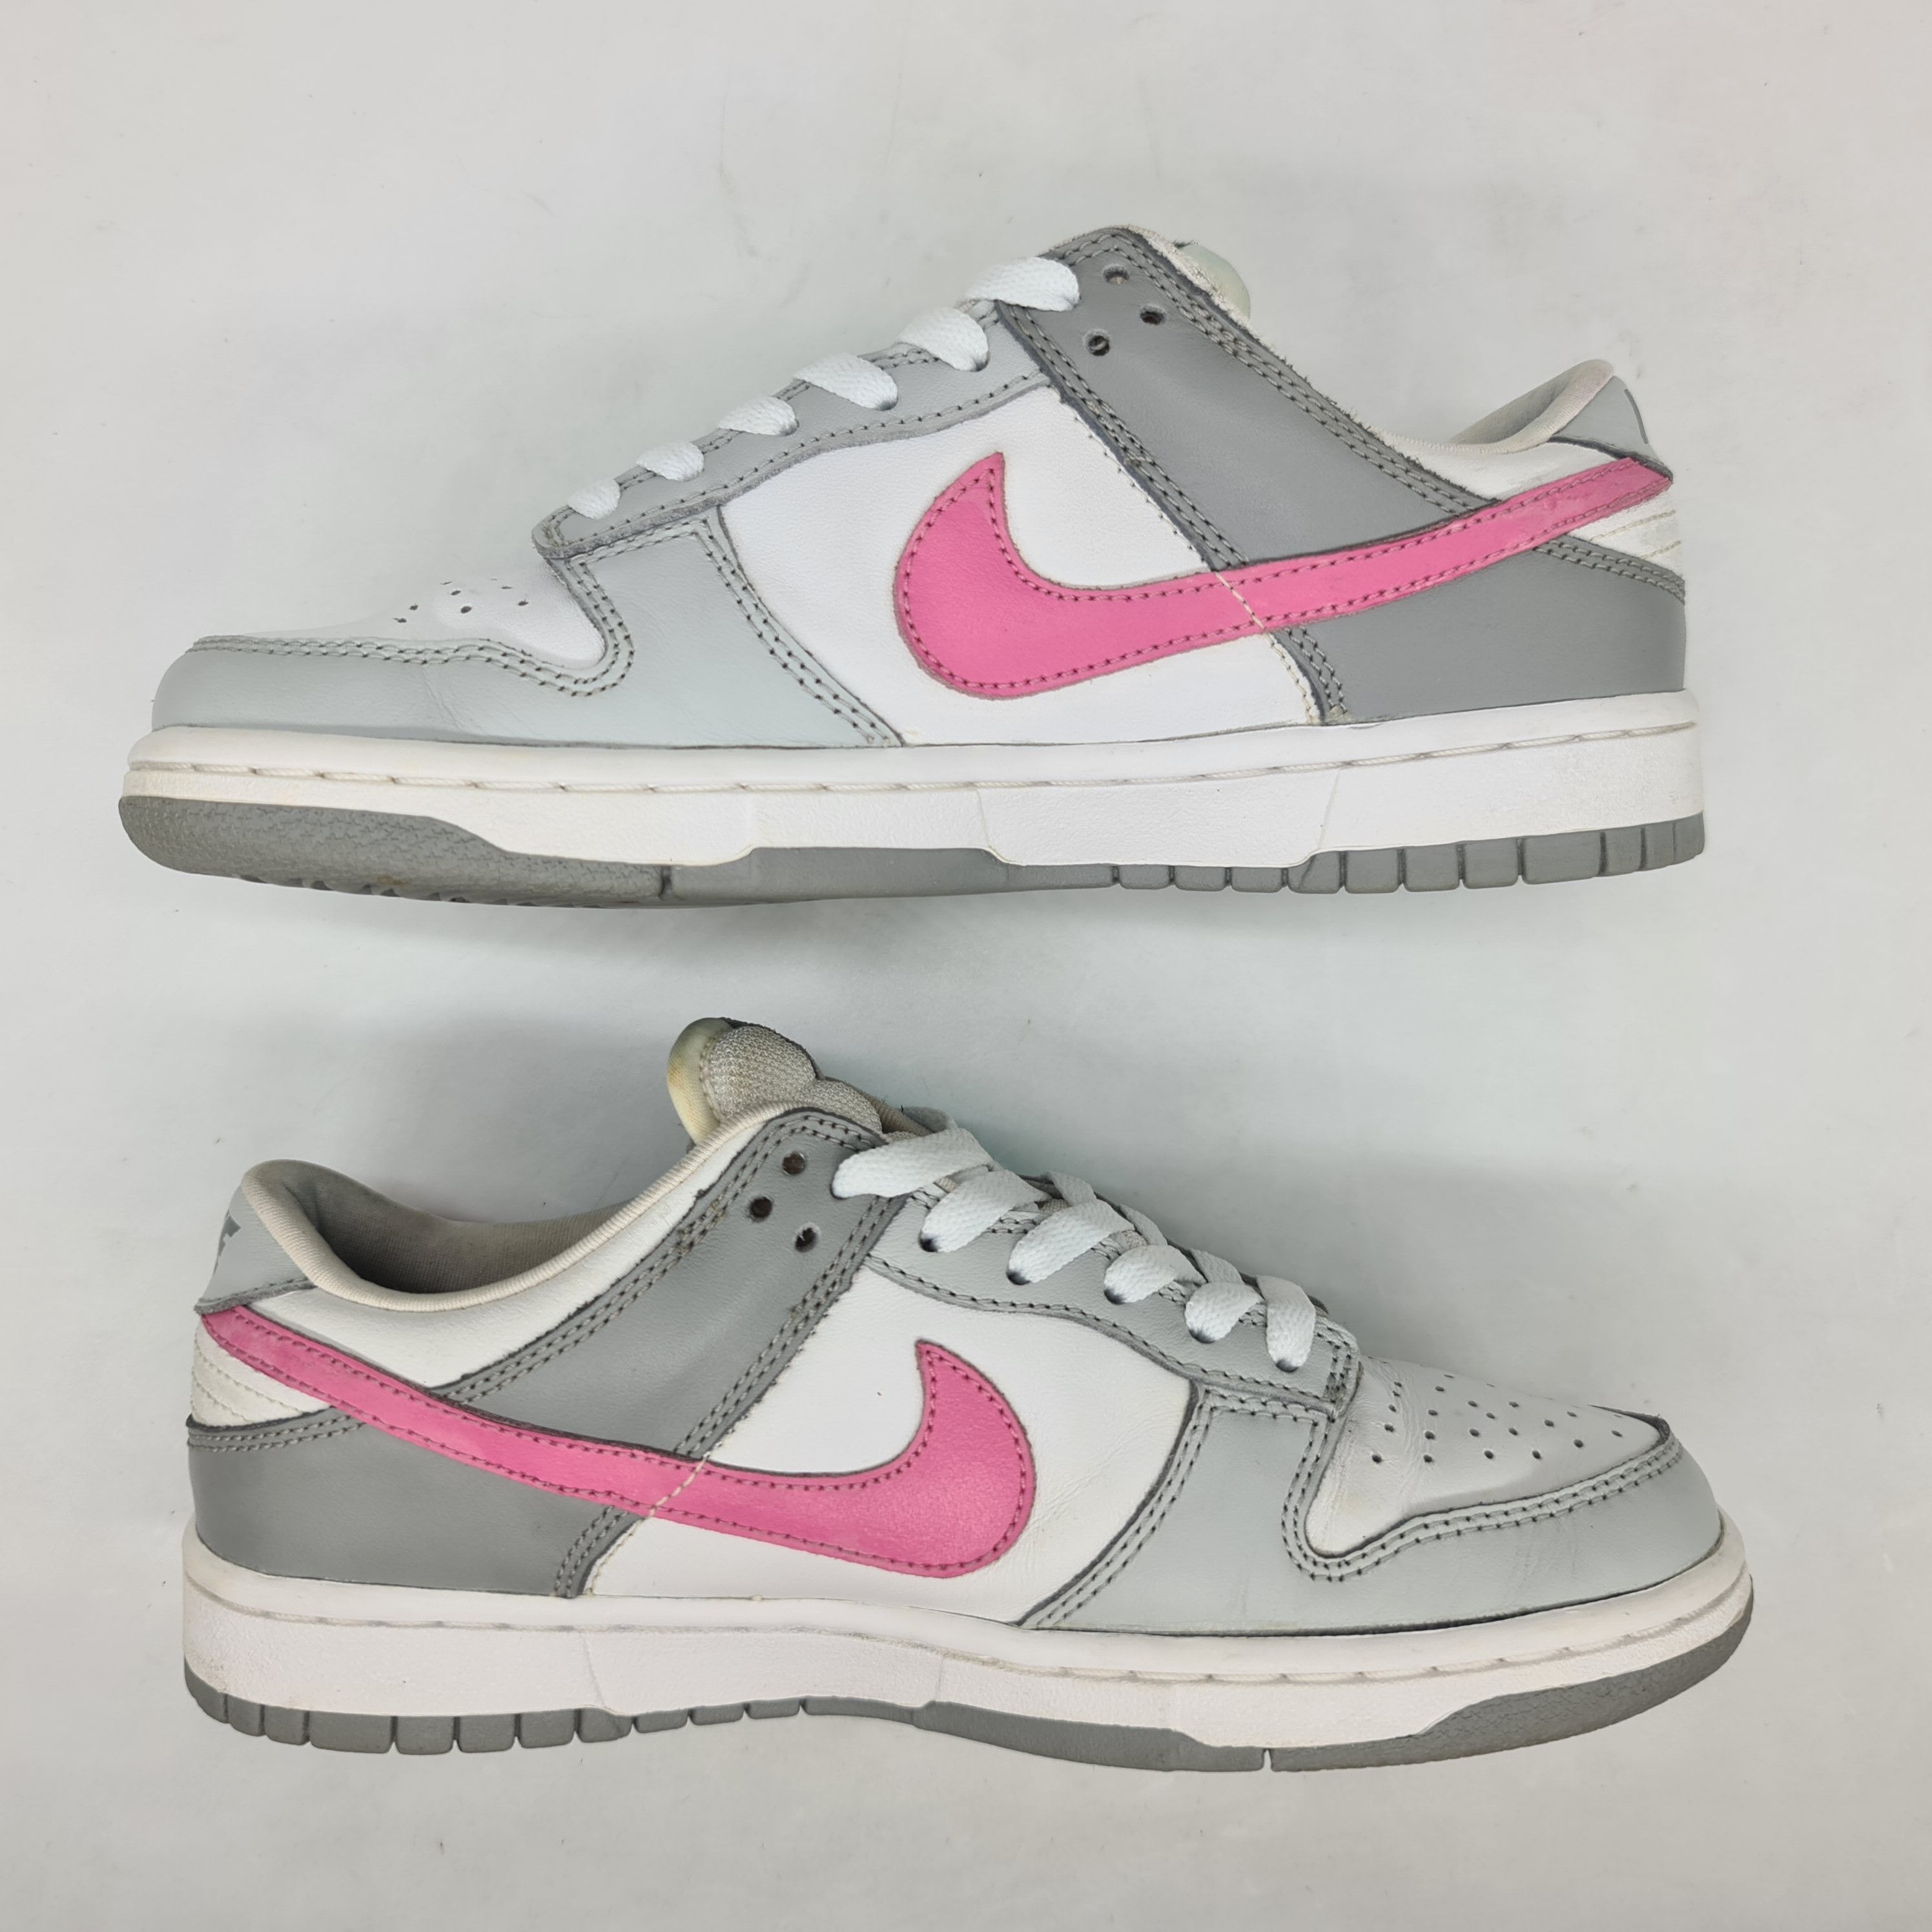 Nike - 2004 W's Dunk Low Pro Pink Neutral Gray - 6